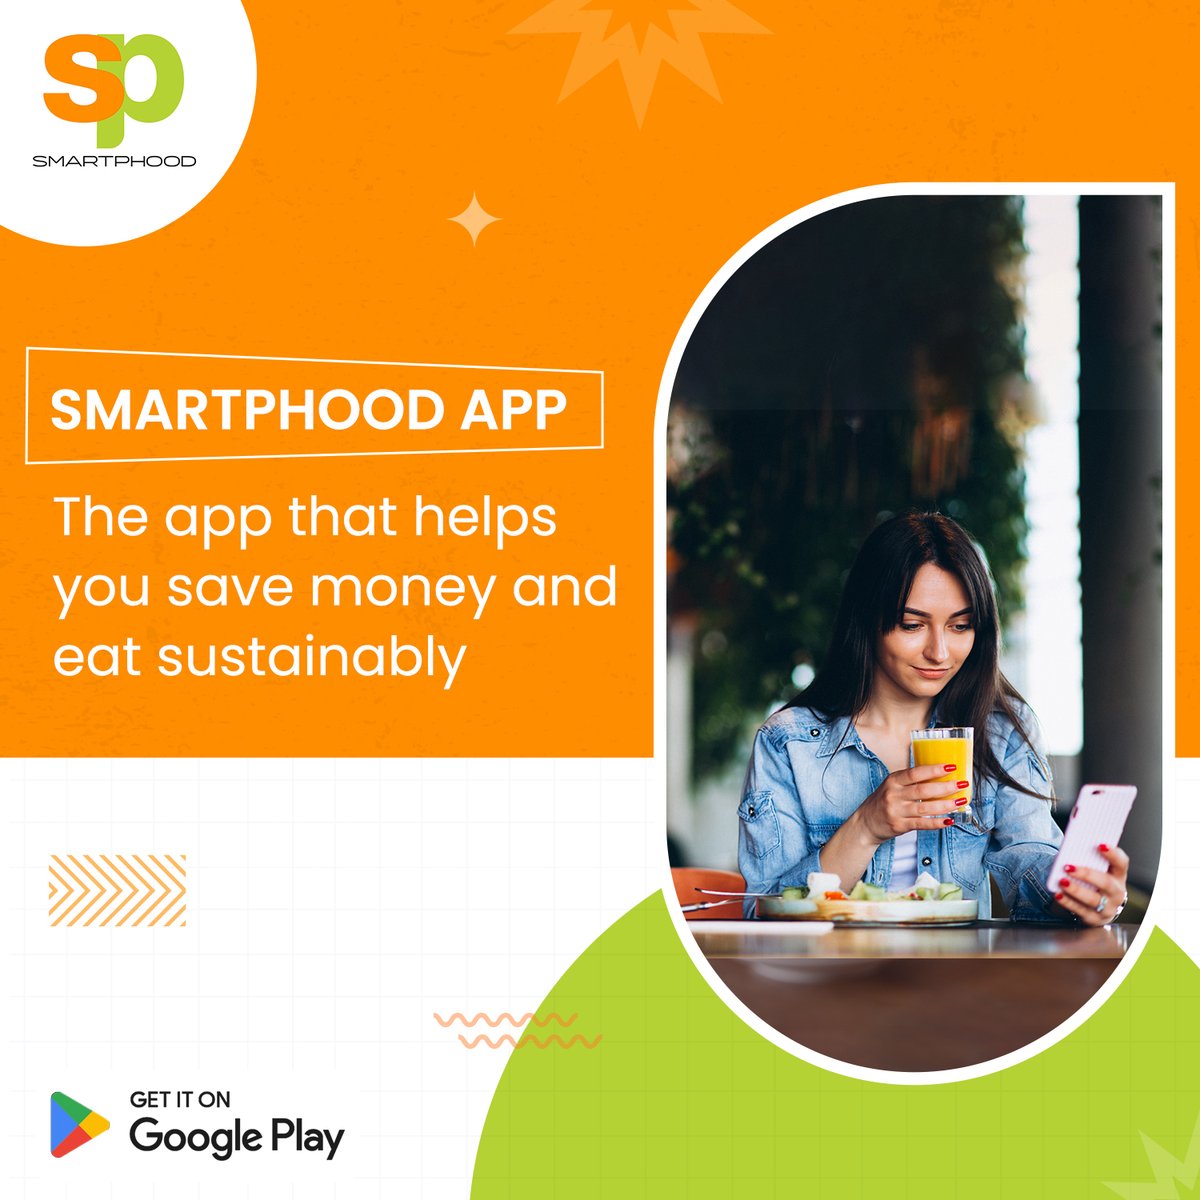 Track, save, and make a positive impact with the Smartphood app. It's time for a smarter way to shop!

#smartphoodapp #androidapp #iosapp #savemoney #saveenvironment #foodwastagesaving #reducefoodwaste #financemanagement #takecontrol